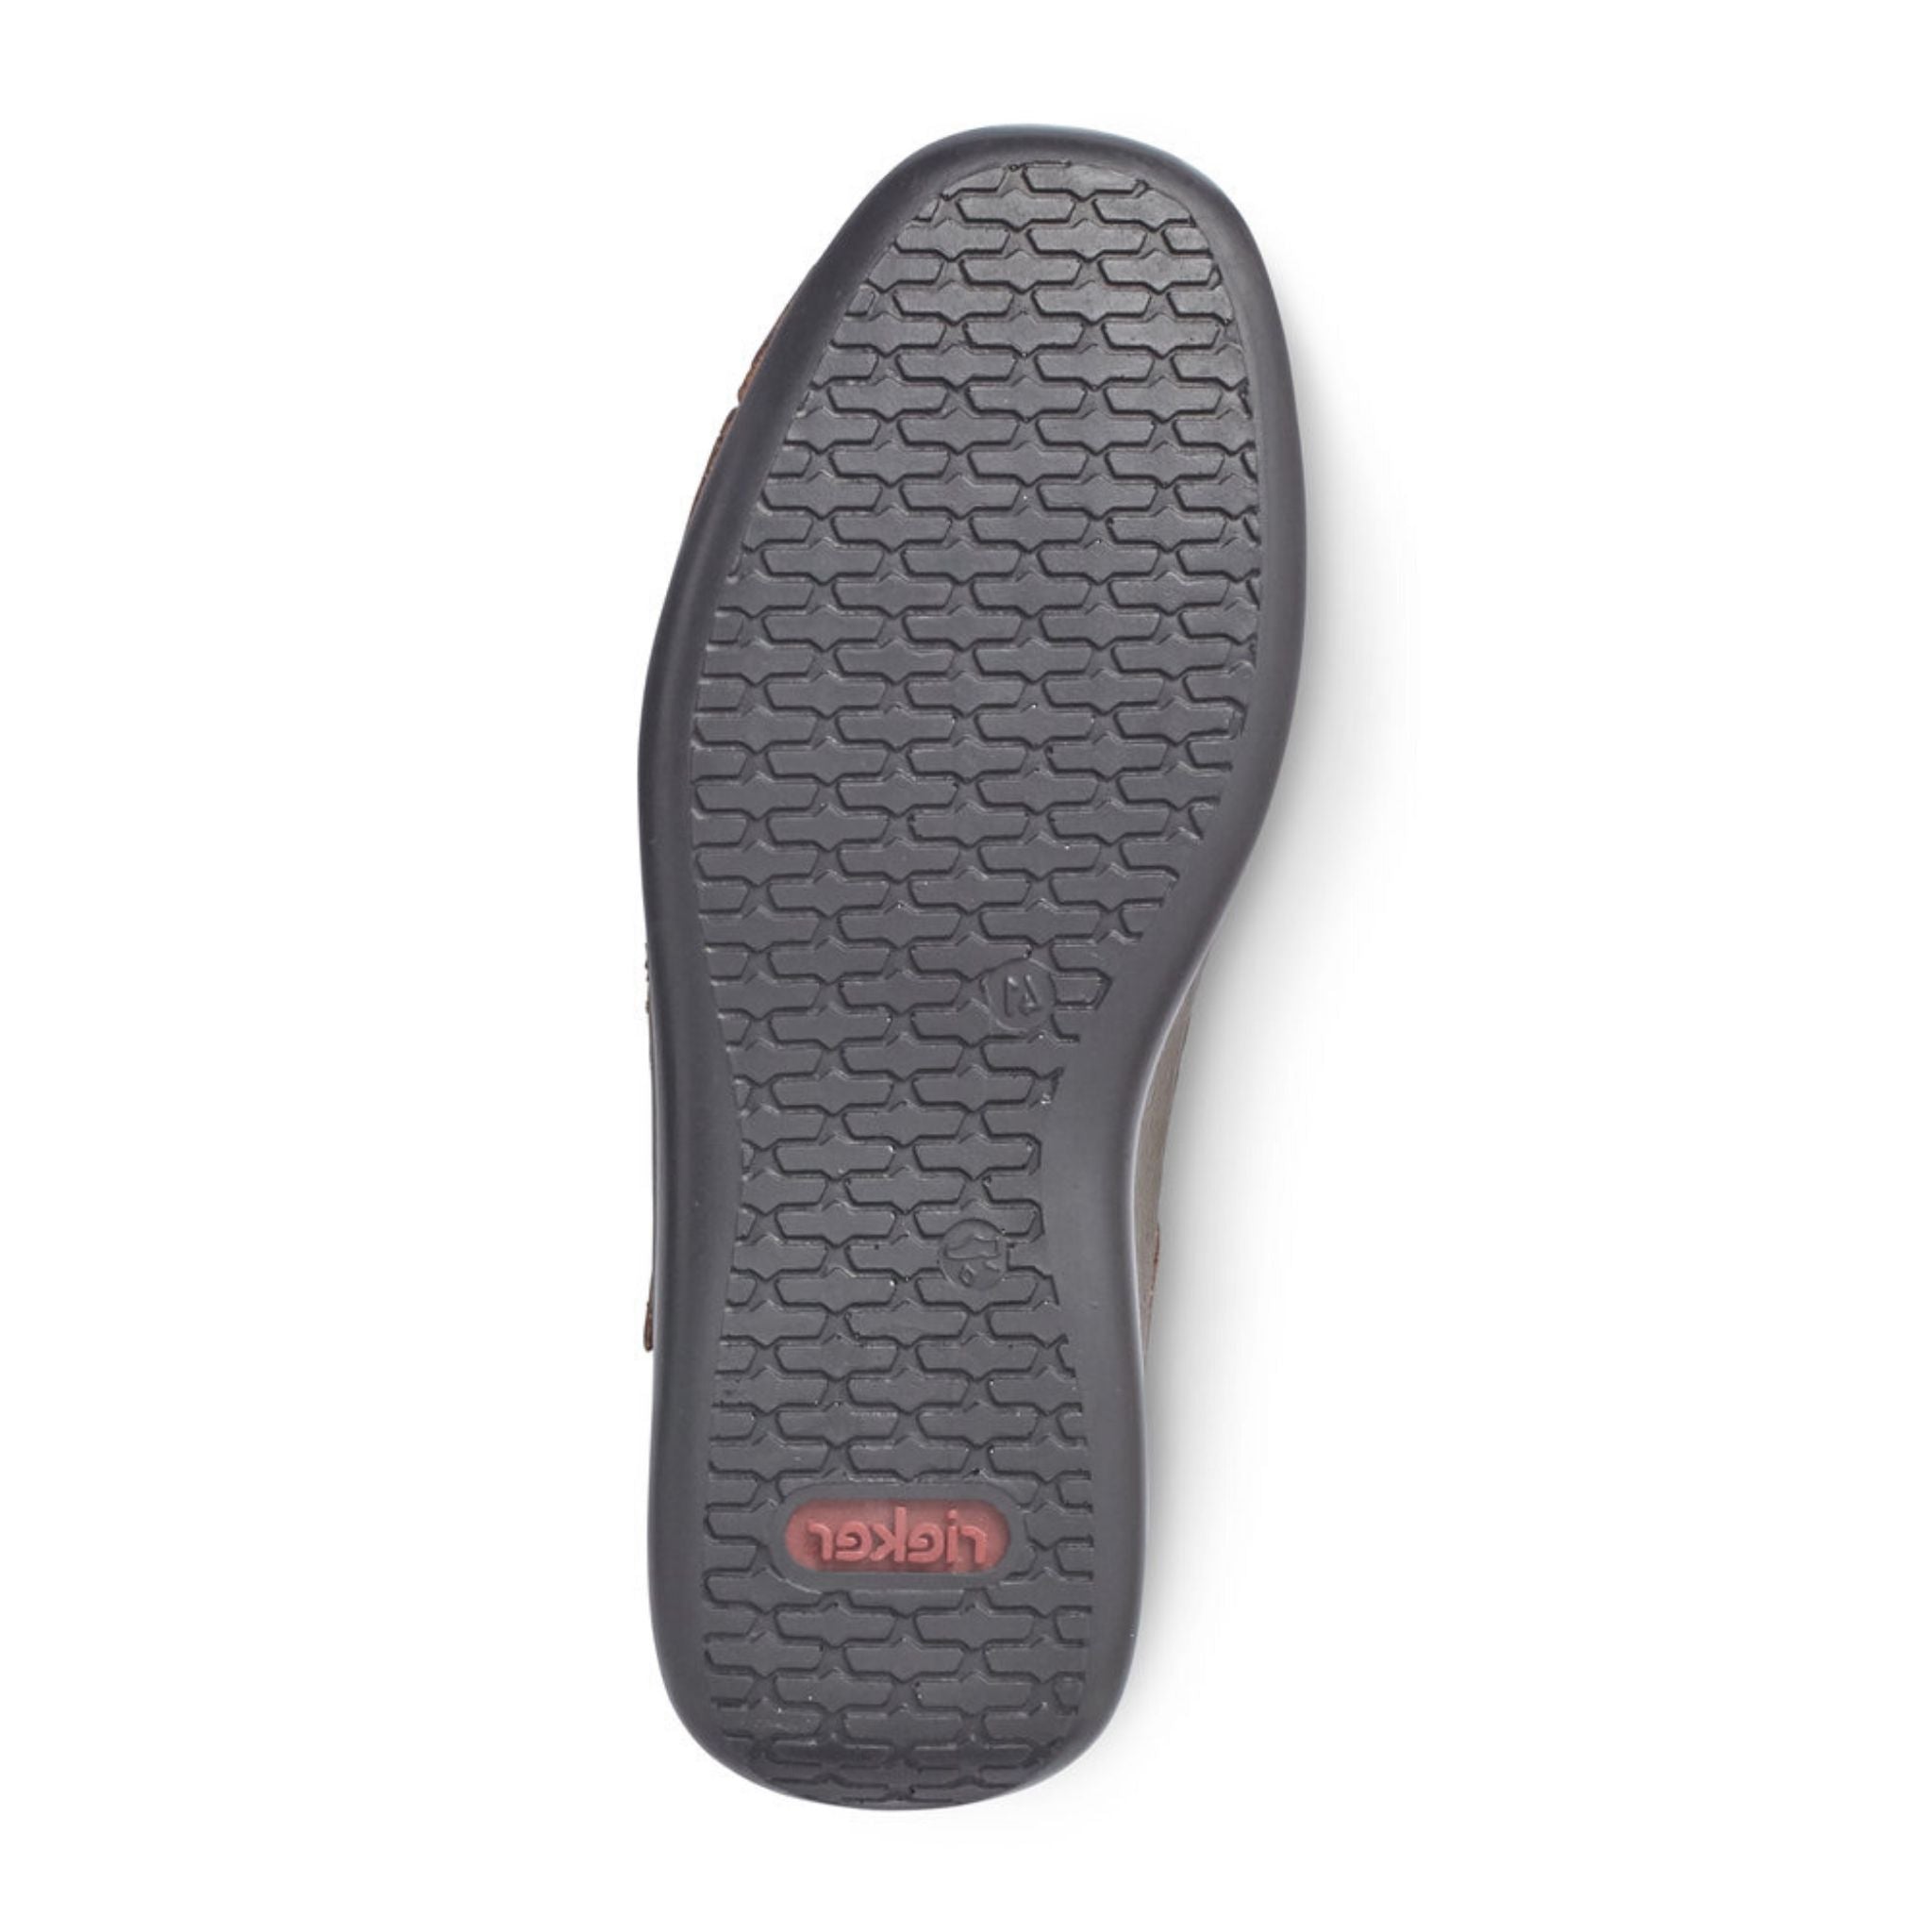 Black outsole with wavy pattern tread